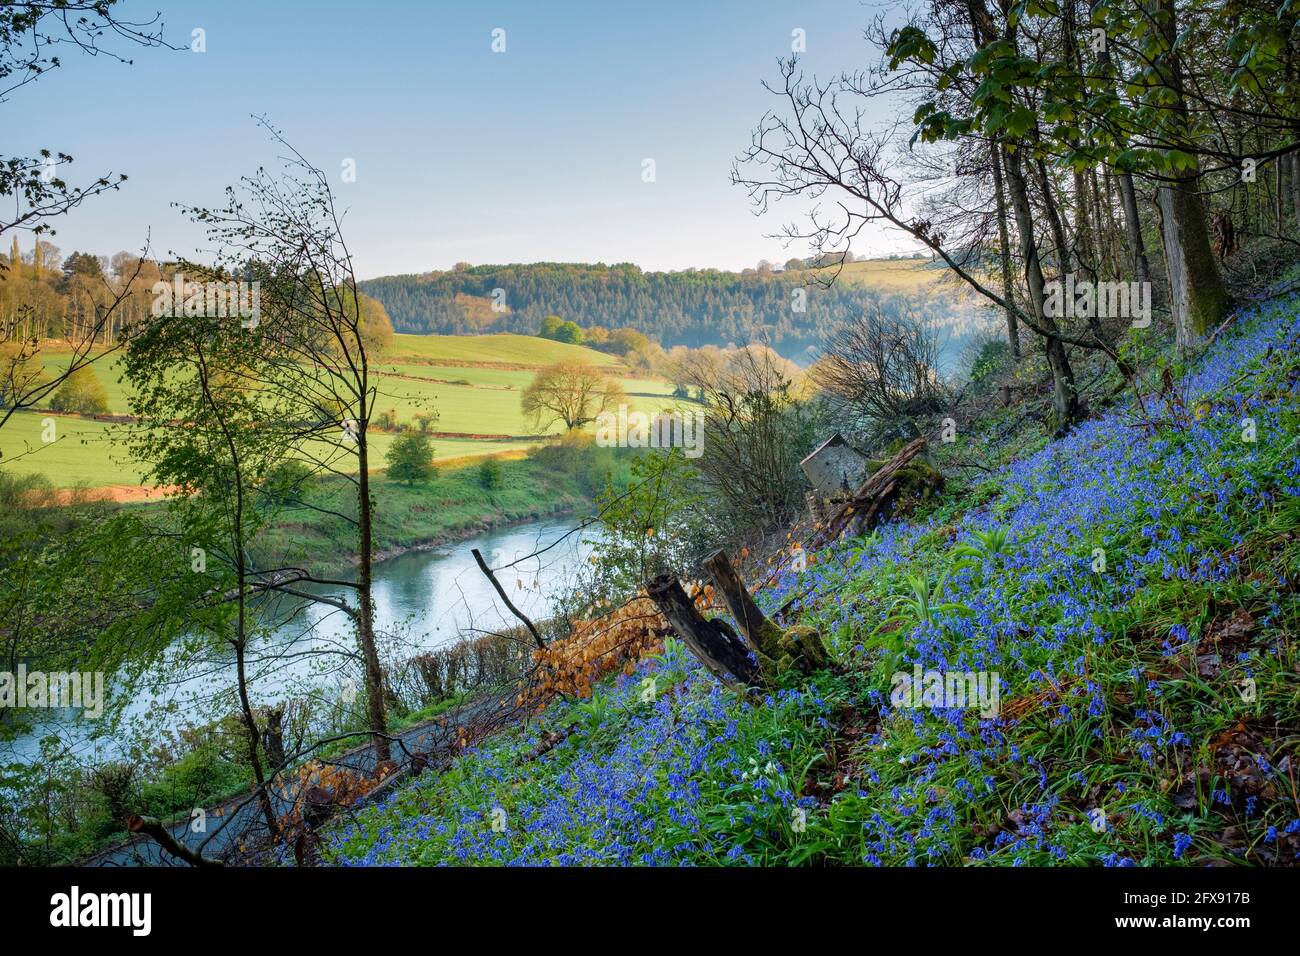 Bluebells in the lower Wye valley near Monmouth. Stock Photo